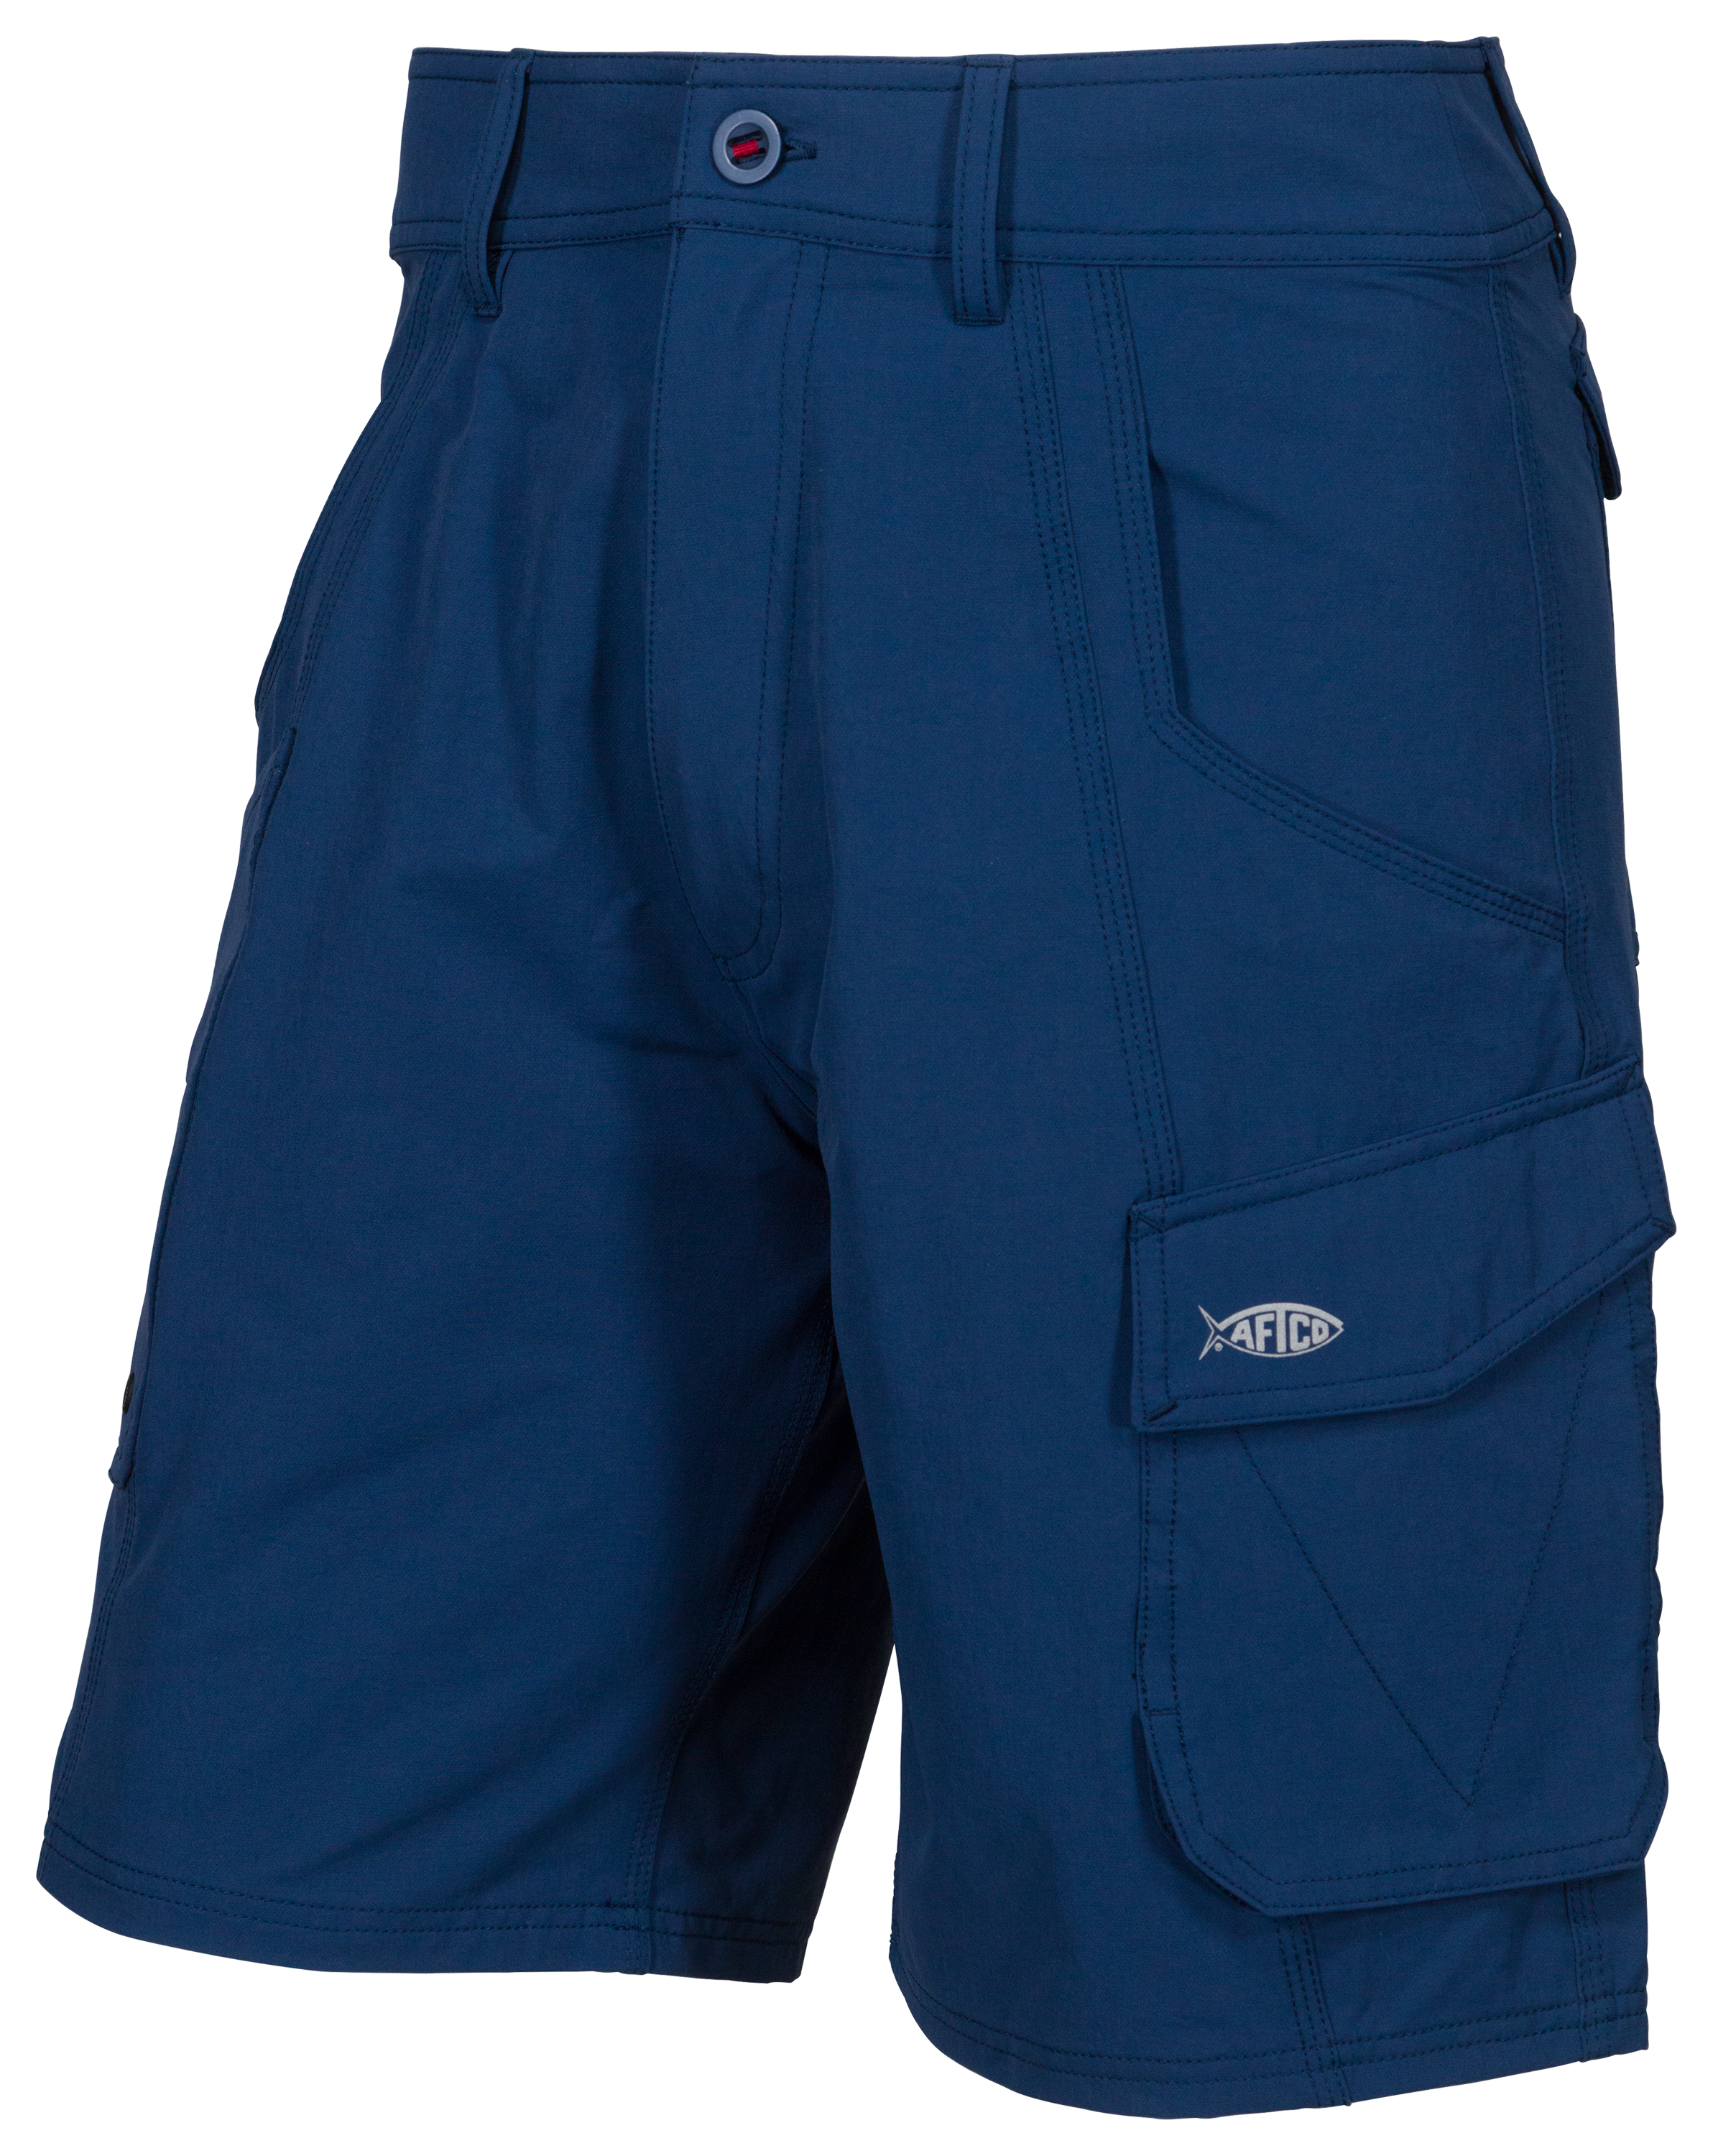 AFTCO Stealth Fishing Shorts for Men